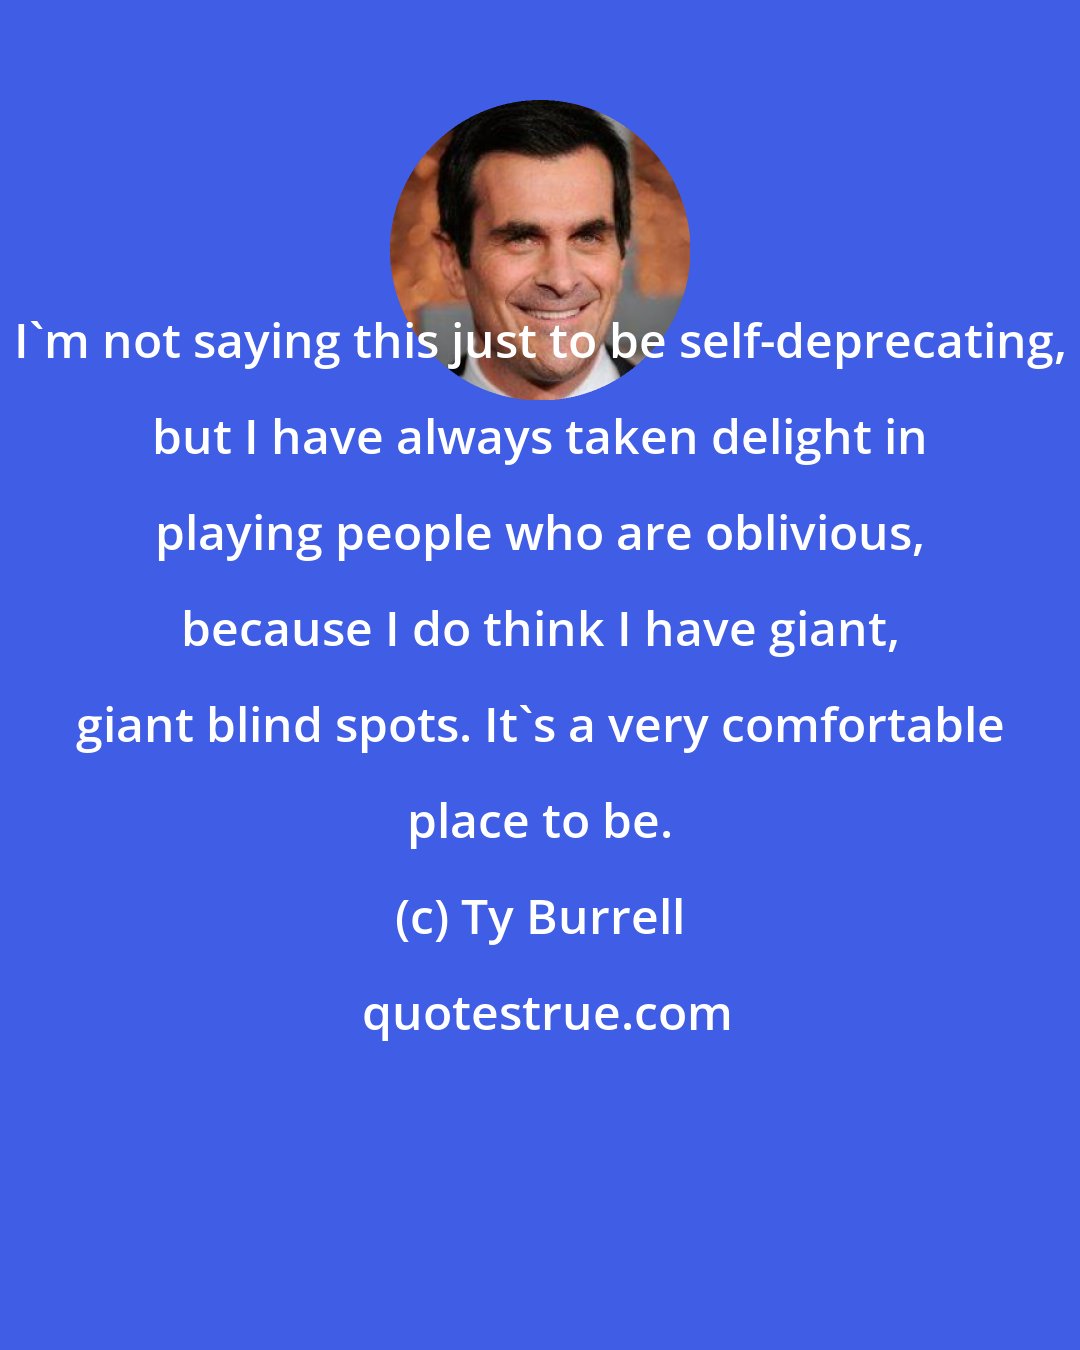 Ty Burrell: I'm not saying this just to be self-deprecating, but I have always taken delight in playing people who are oblivious, because I do think I have giant, giant blind spots. It's a very comfortable place to be.